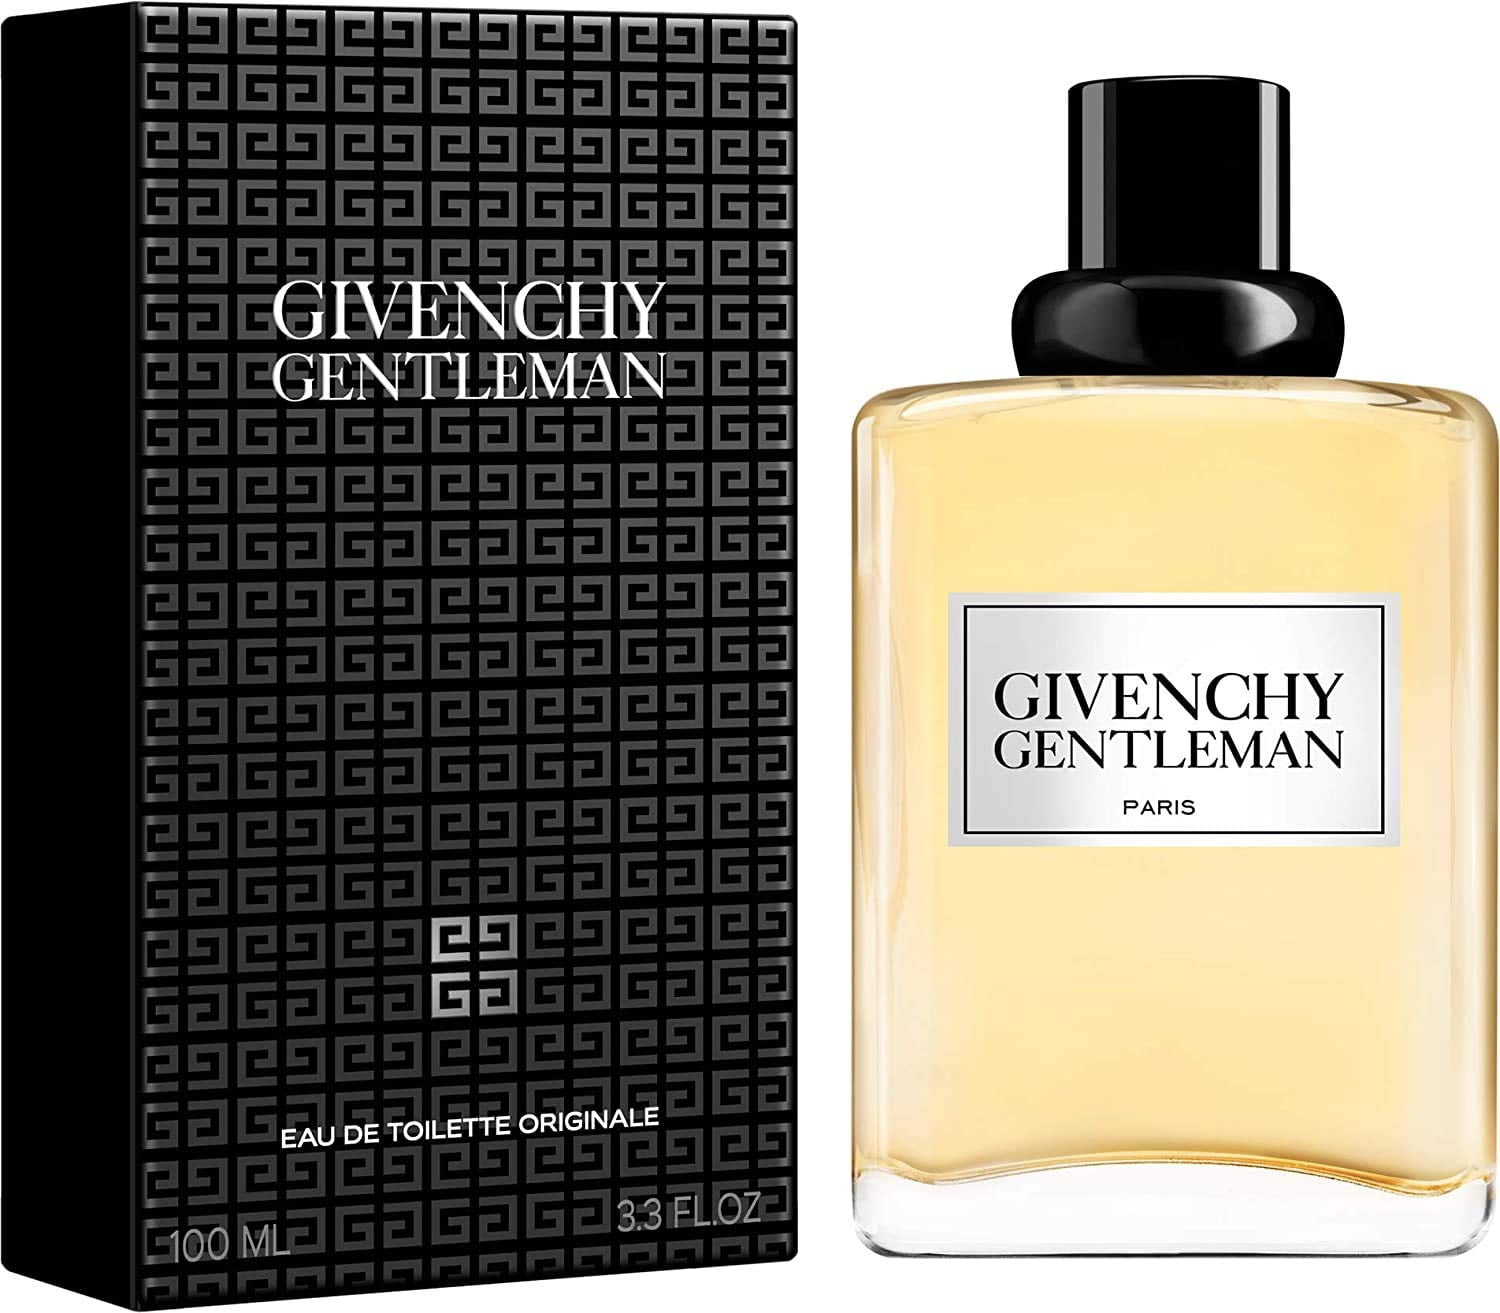 Givenchy - GIVENCHY GENTLEMAN EDT SPRAY 3.3 OZ GENTLEMAN/GIVENCHY EDT